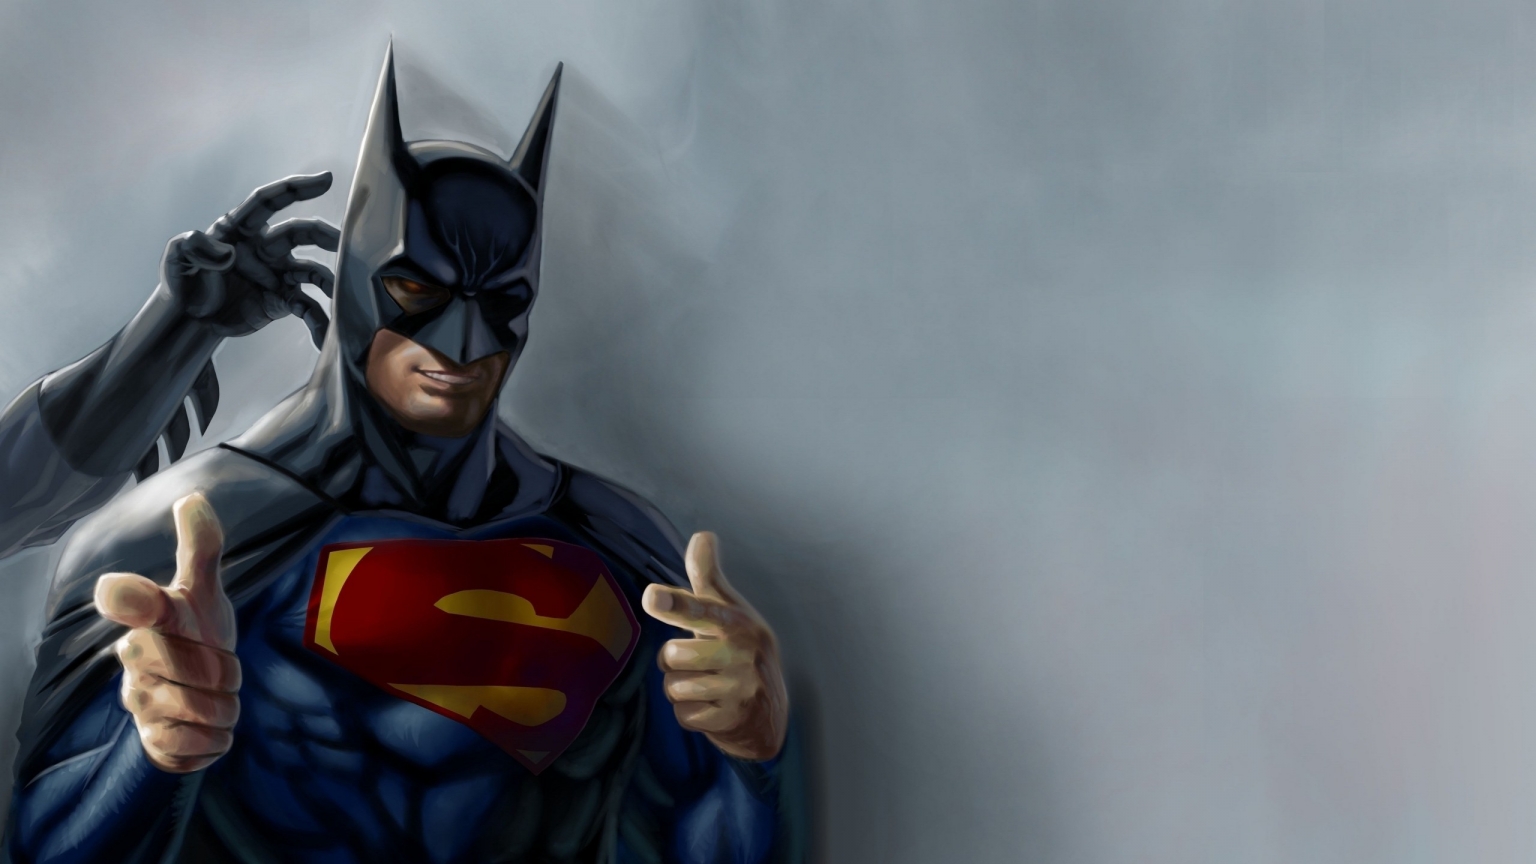 Batman and Superman for 1536 x 864 HDTV resolution